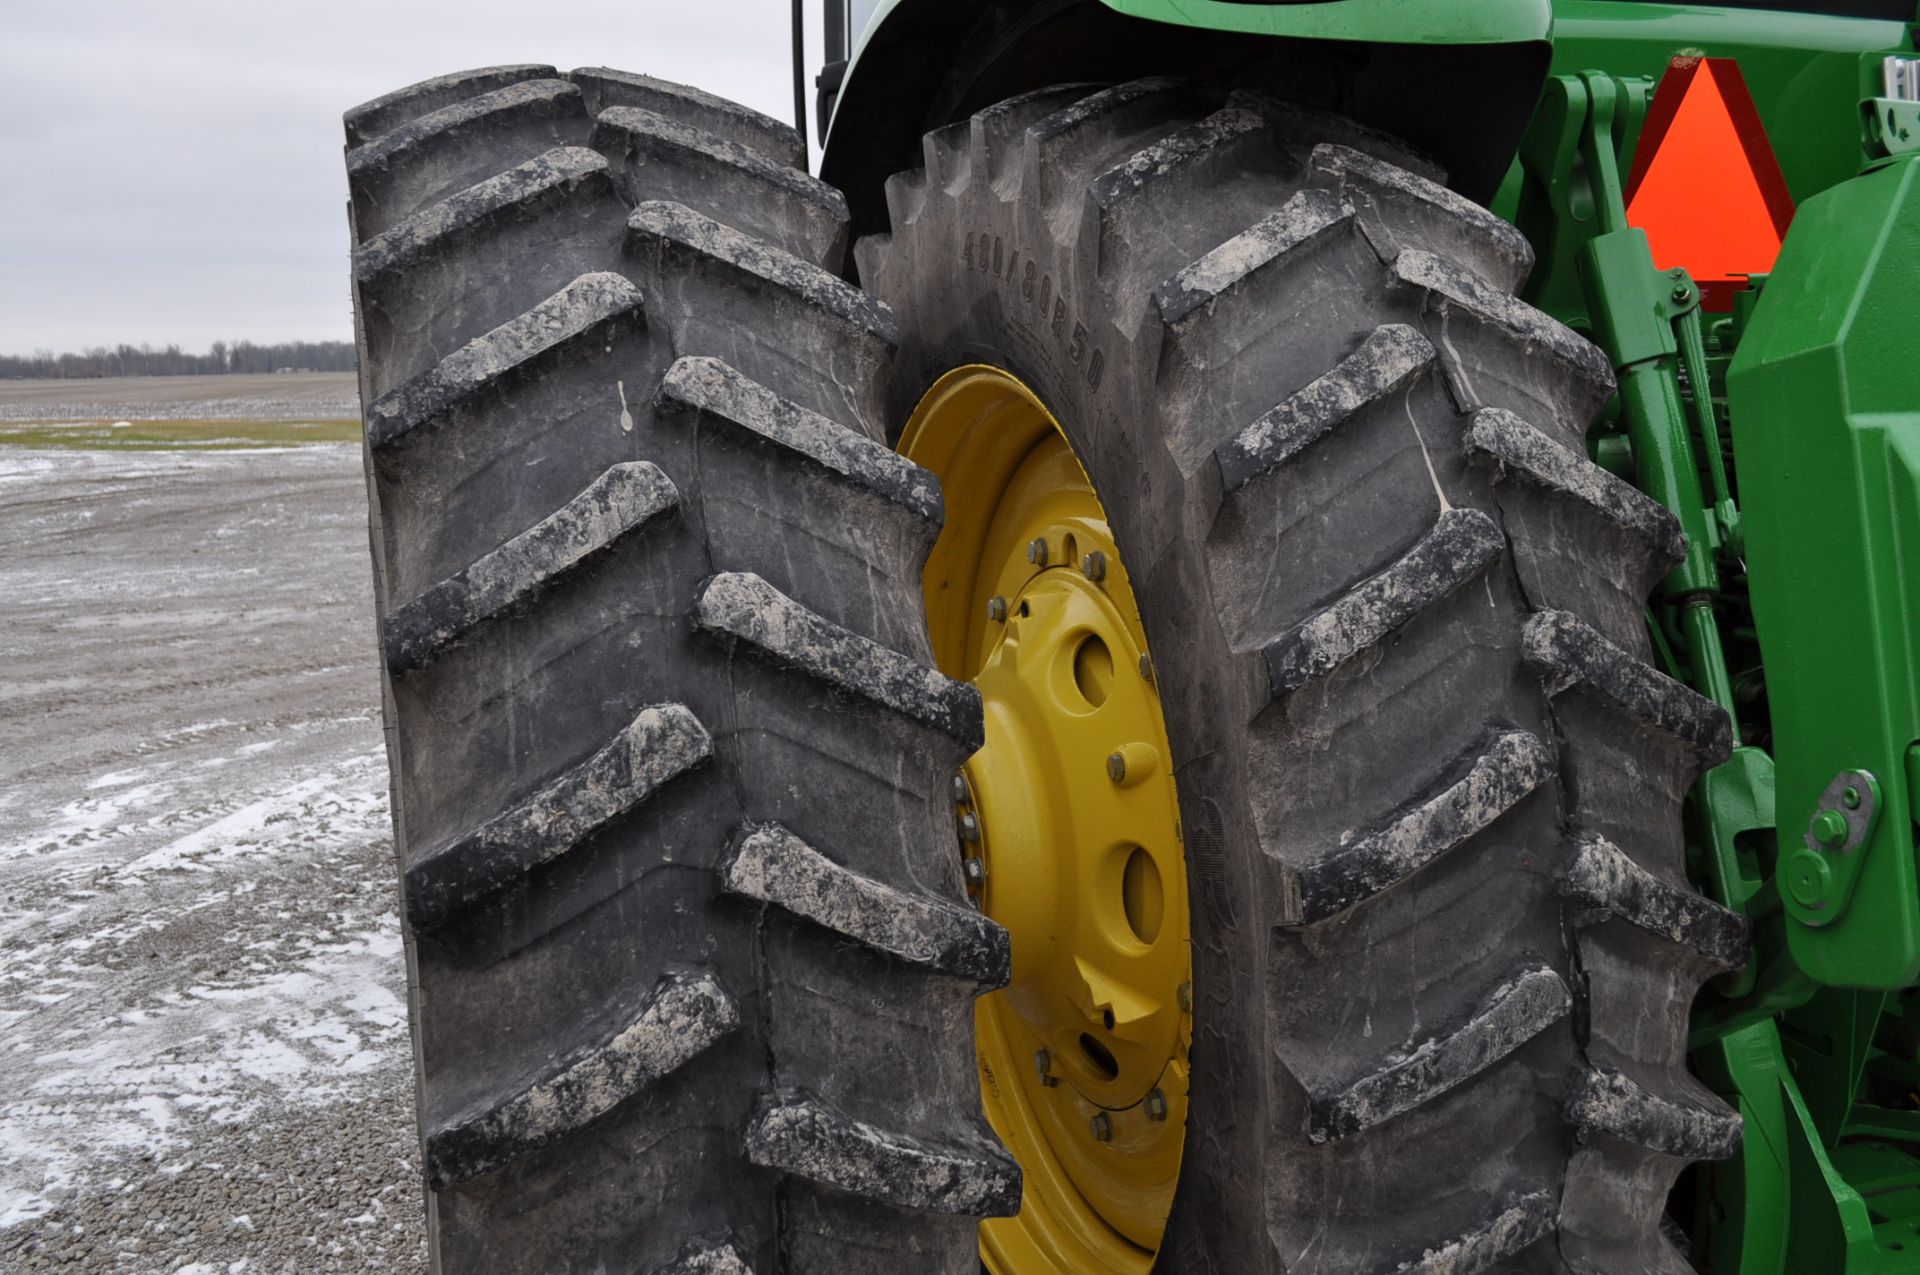 John Deere 8360R MFWD tractor, 480/80R50 rear duals, 420/85 R34 front duals, IVT, ILS, active - Image 5 of 40